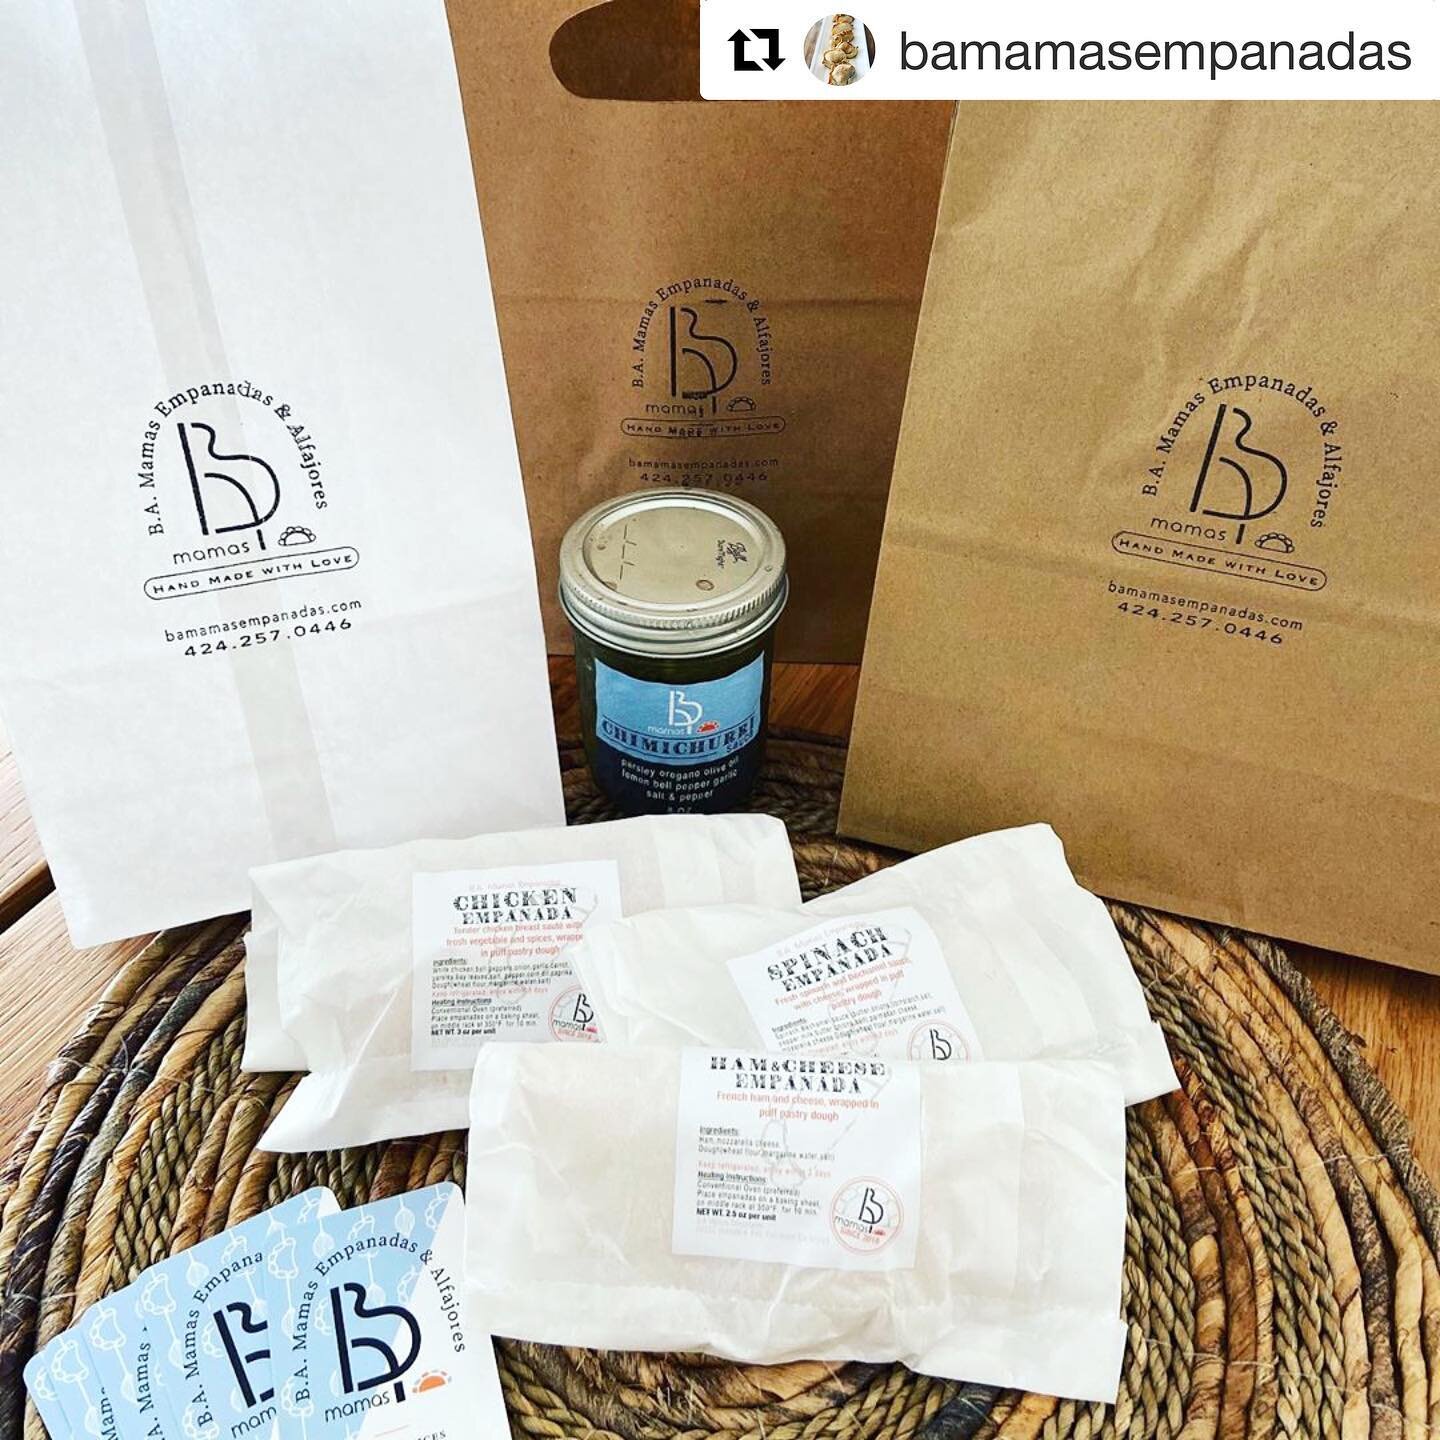 @bamamasempanadas are prepackaged and ready to heat up in your oven. Heating instructions included!
.
.
.
.
.
#bamamasempanadas #empanadas #southbayfoodie #argentinianfood #empanadalovers #rvcertifiedfarmersmarket #9amto2pm #farmersmarket #redondobea